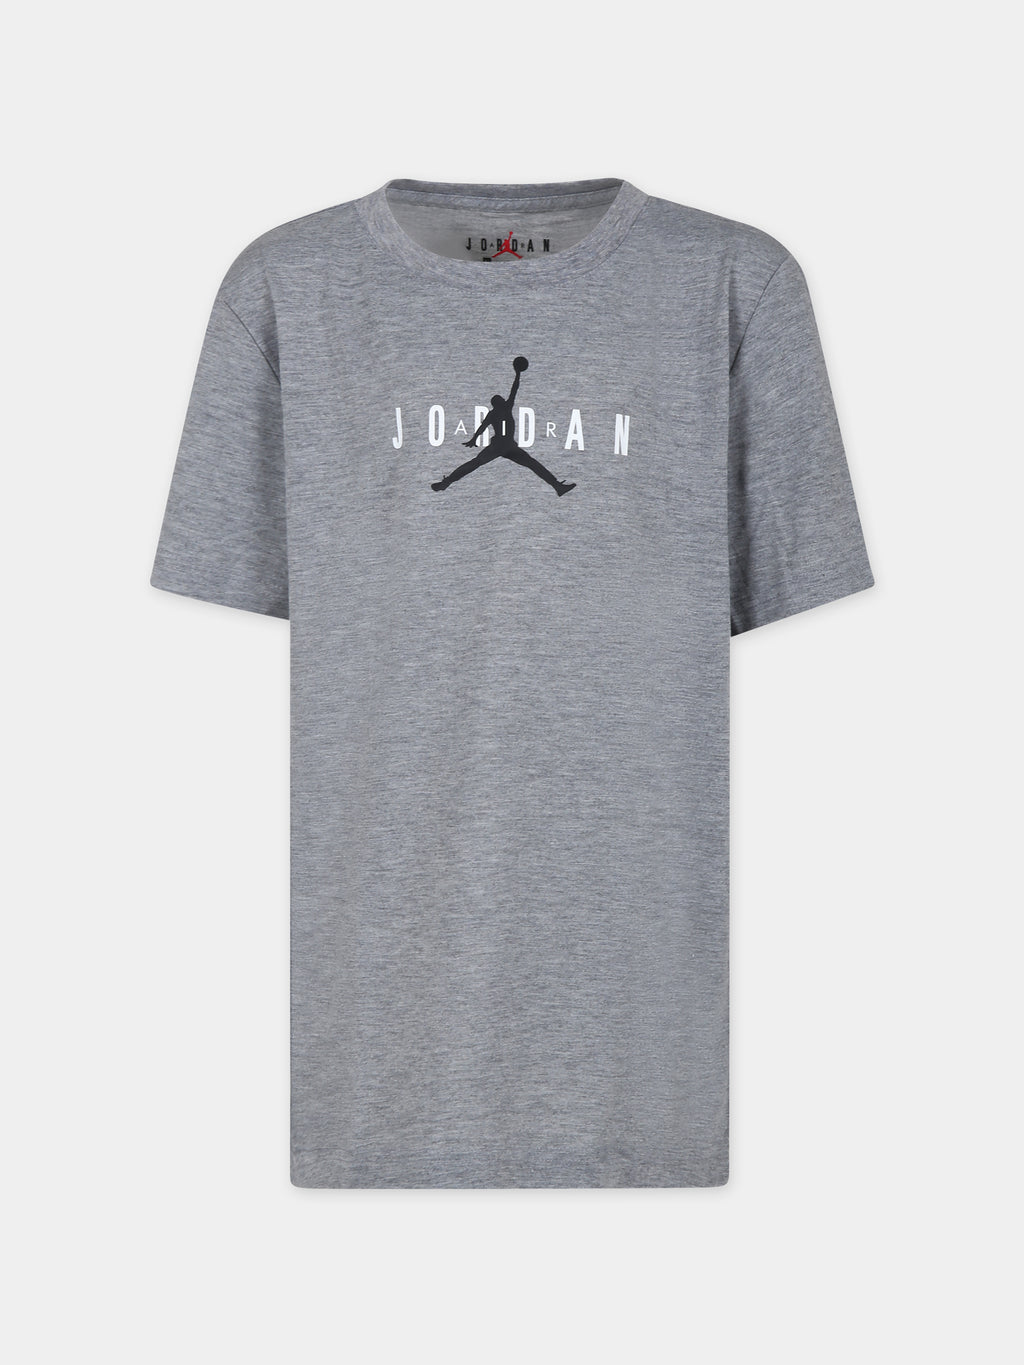 Grey t-shirt for boy with Jumpman and logo